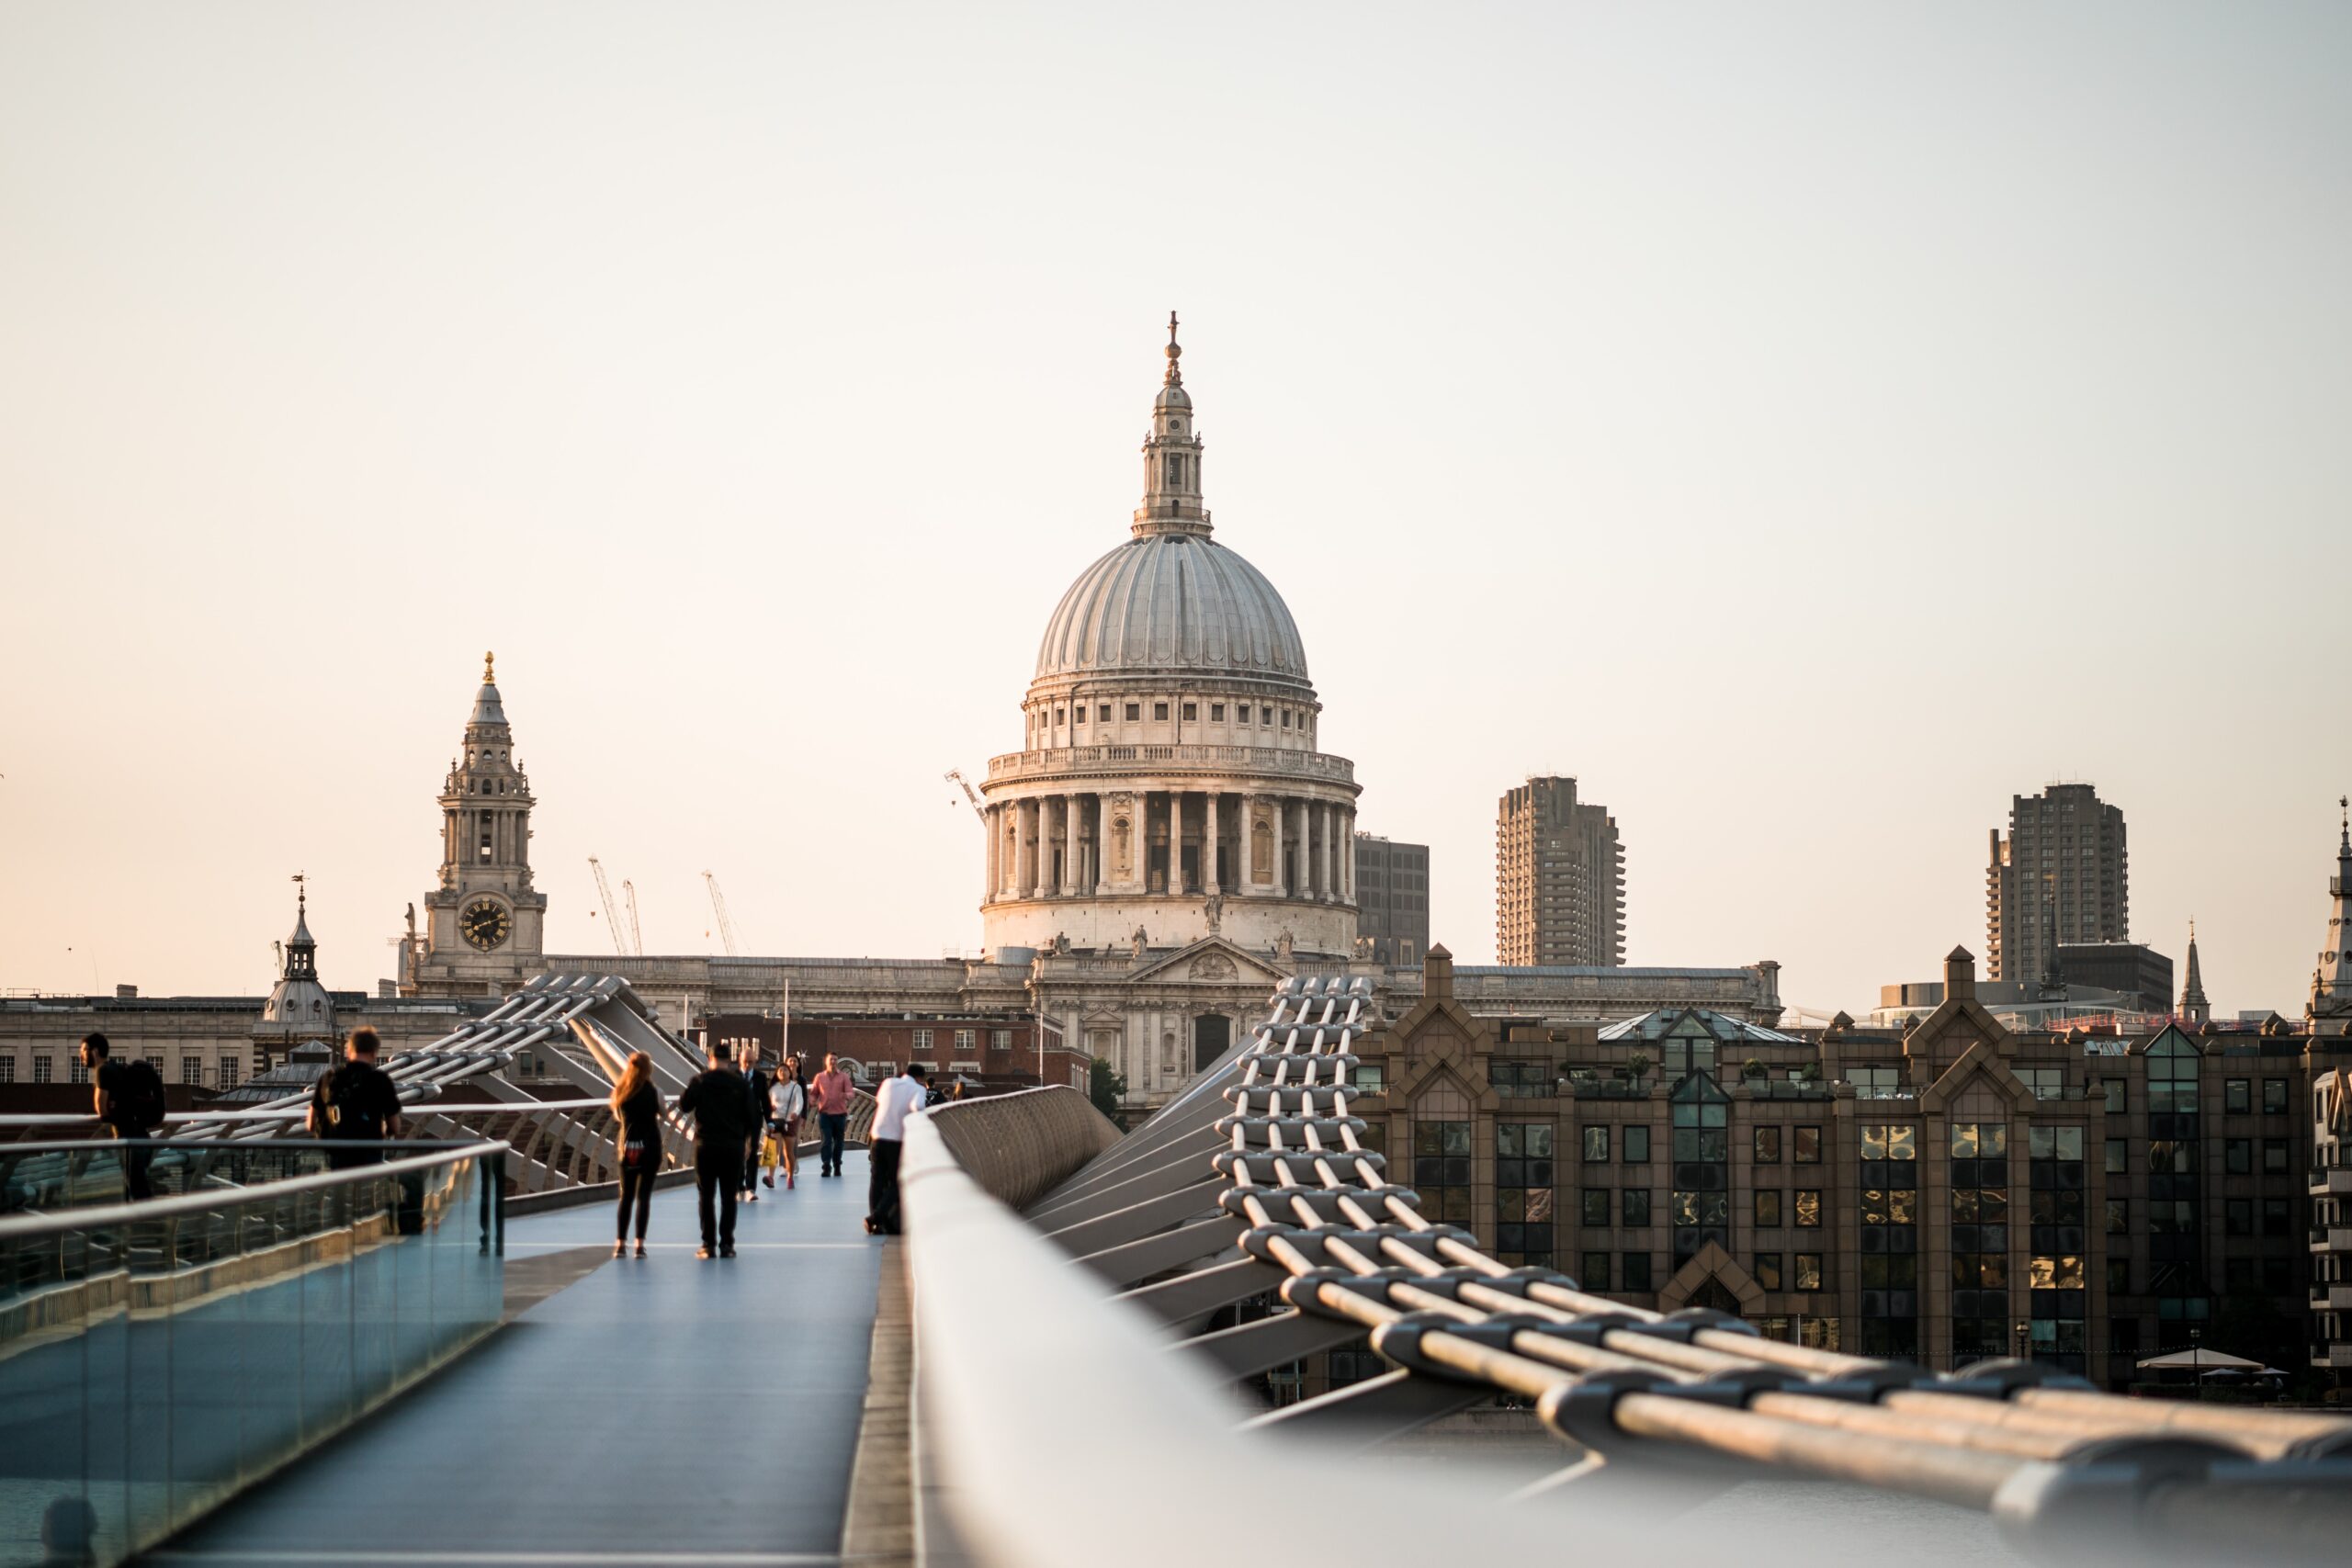 The inner city of London is home to the most popular attractions. Check out the attractions on the outskirts of the city that are just as important to see.
pictured: Millennium Bridge in London near sunset with locals leisurely walking around